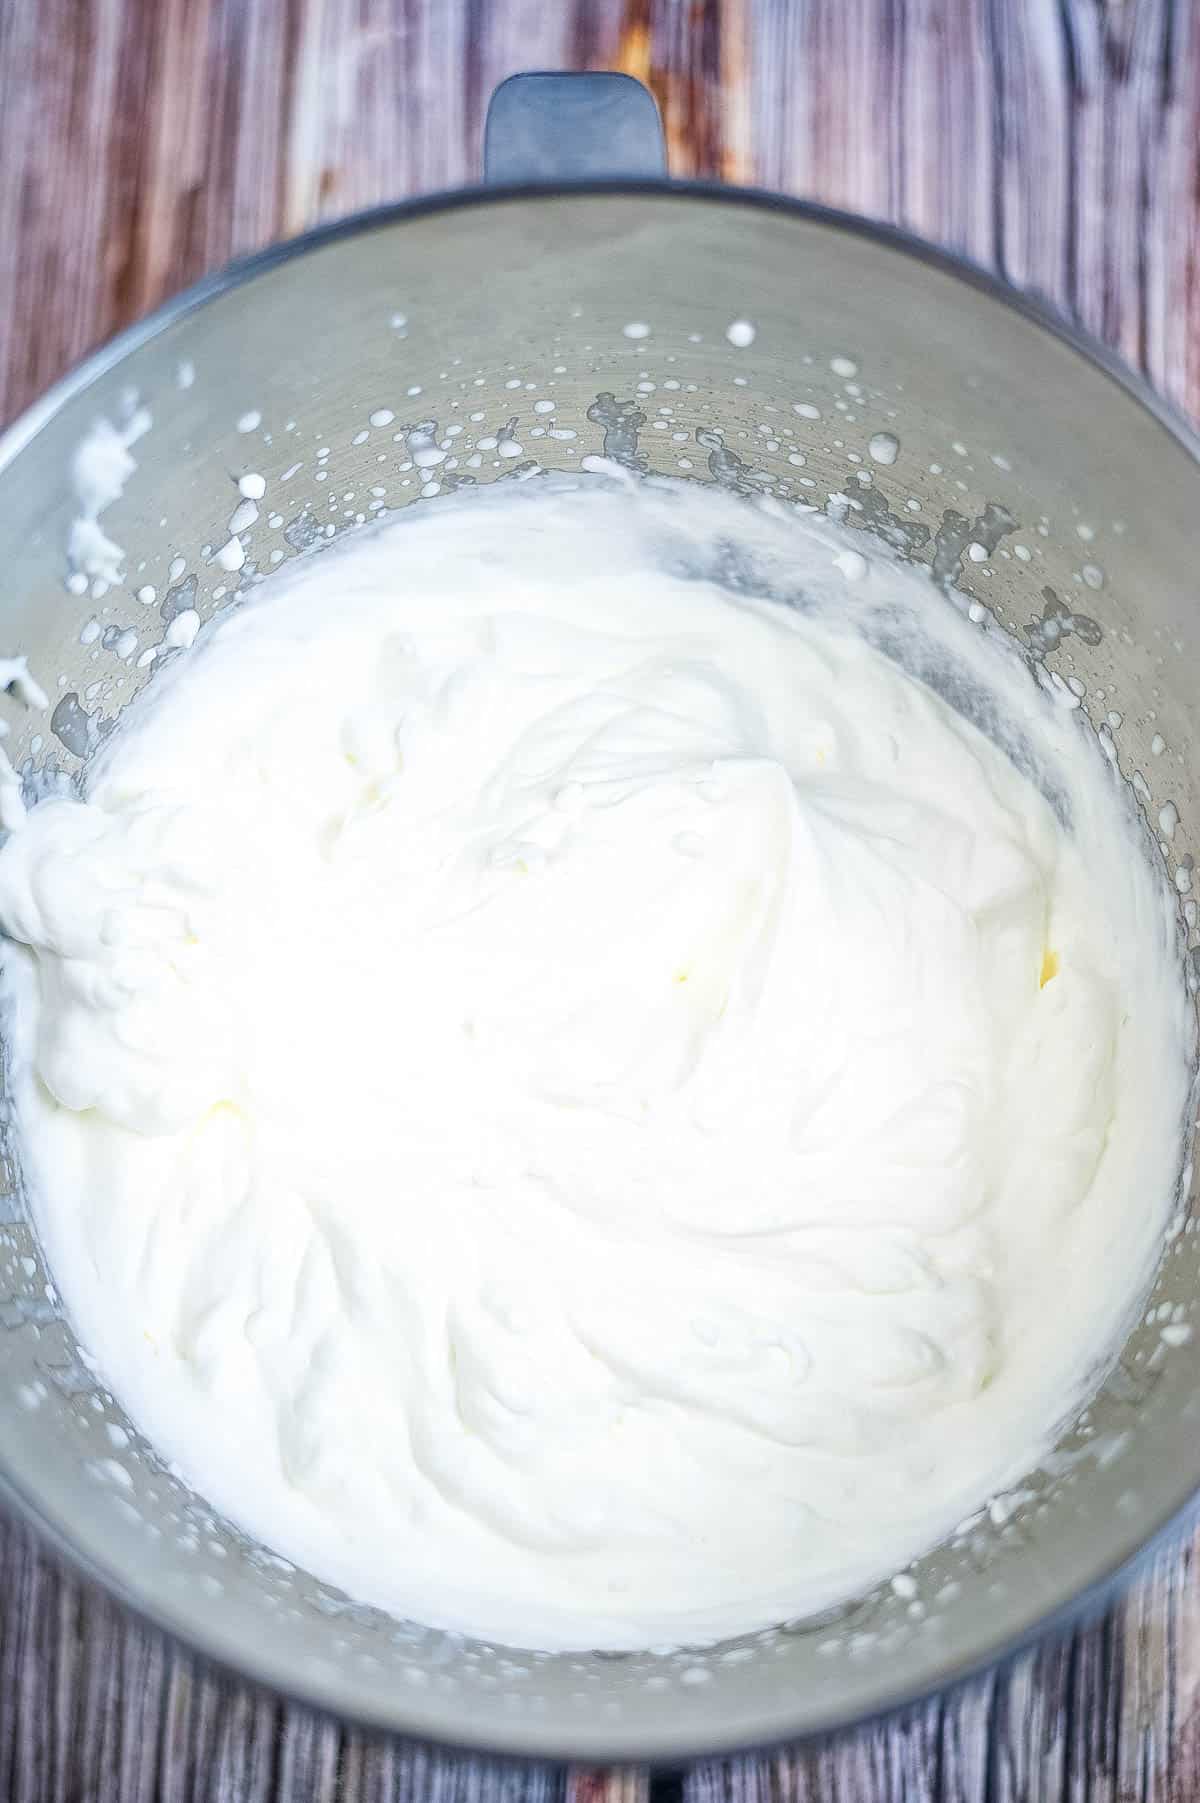 Whipped cream in a metal bowl.